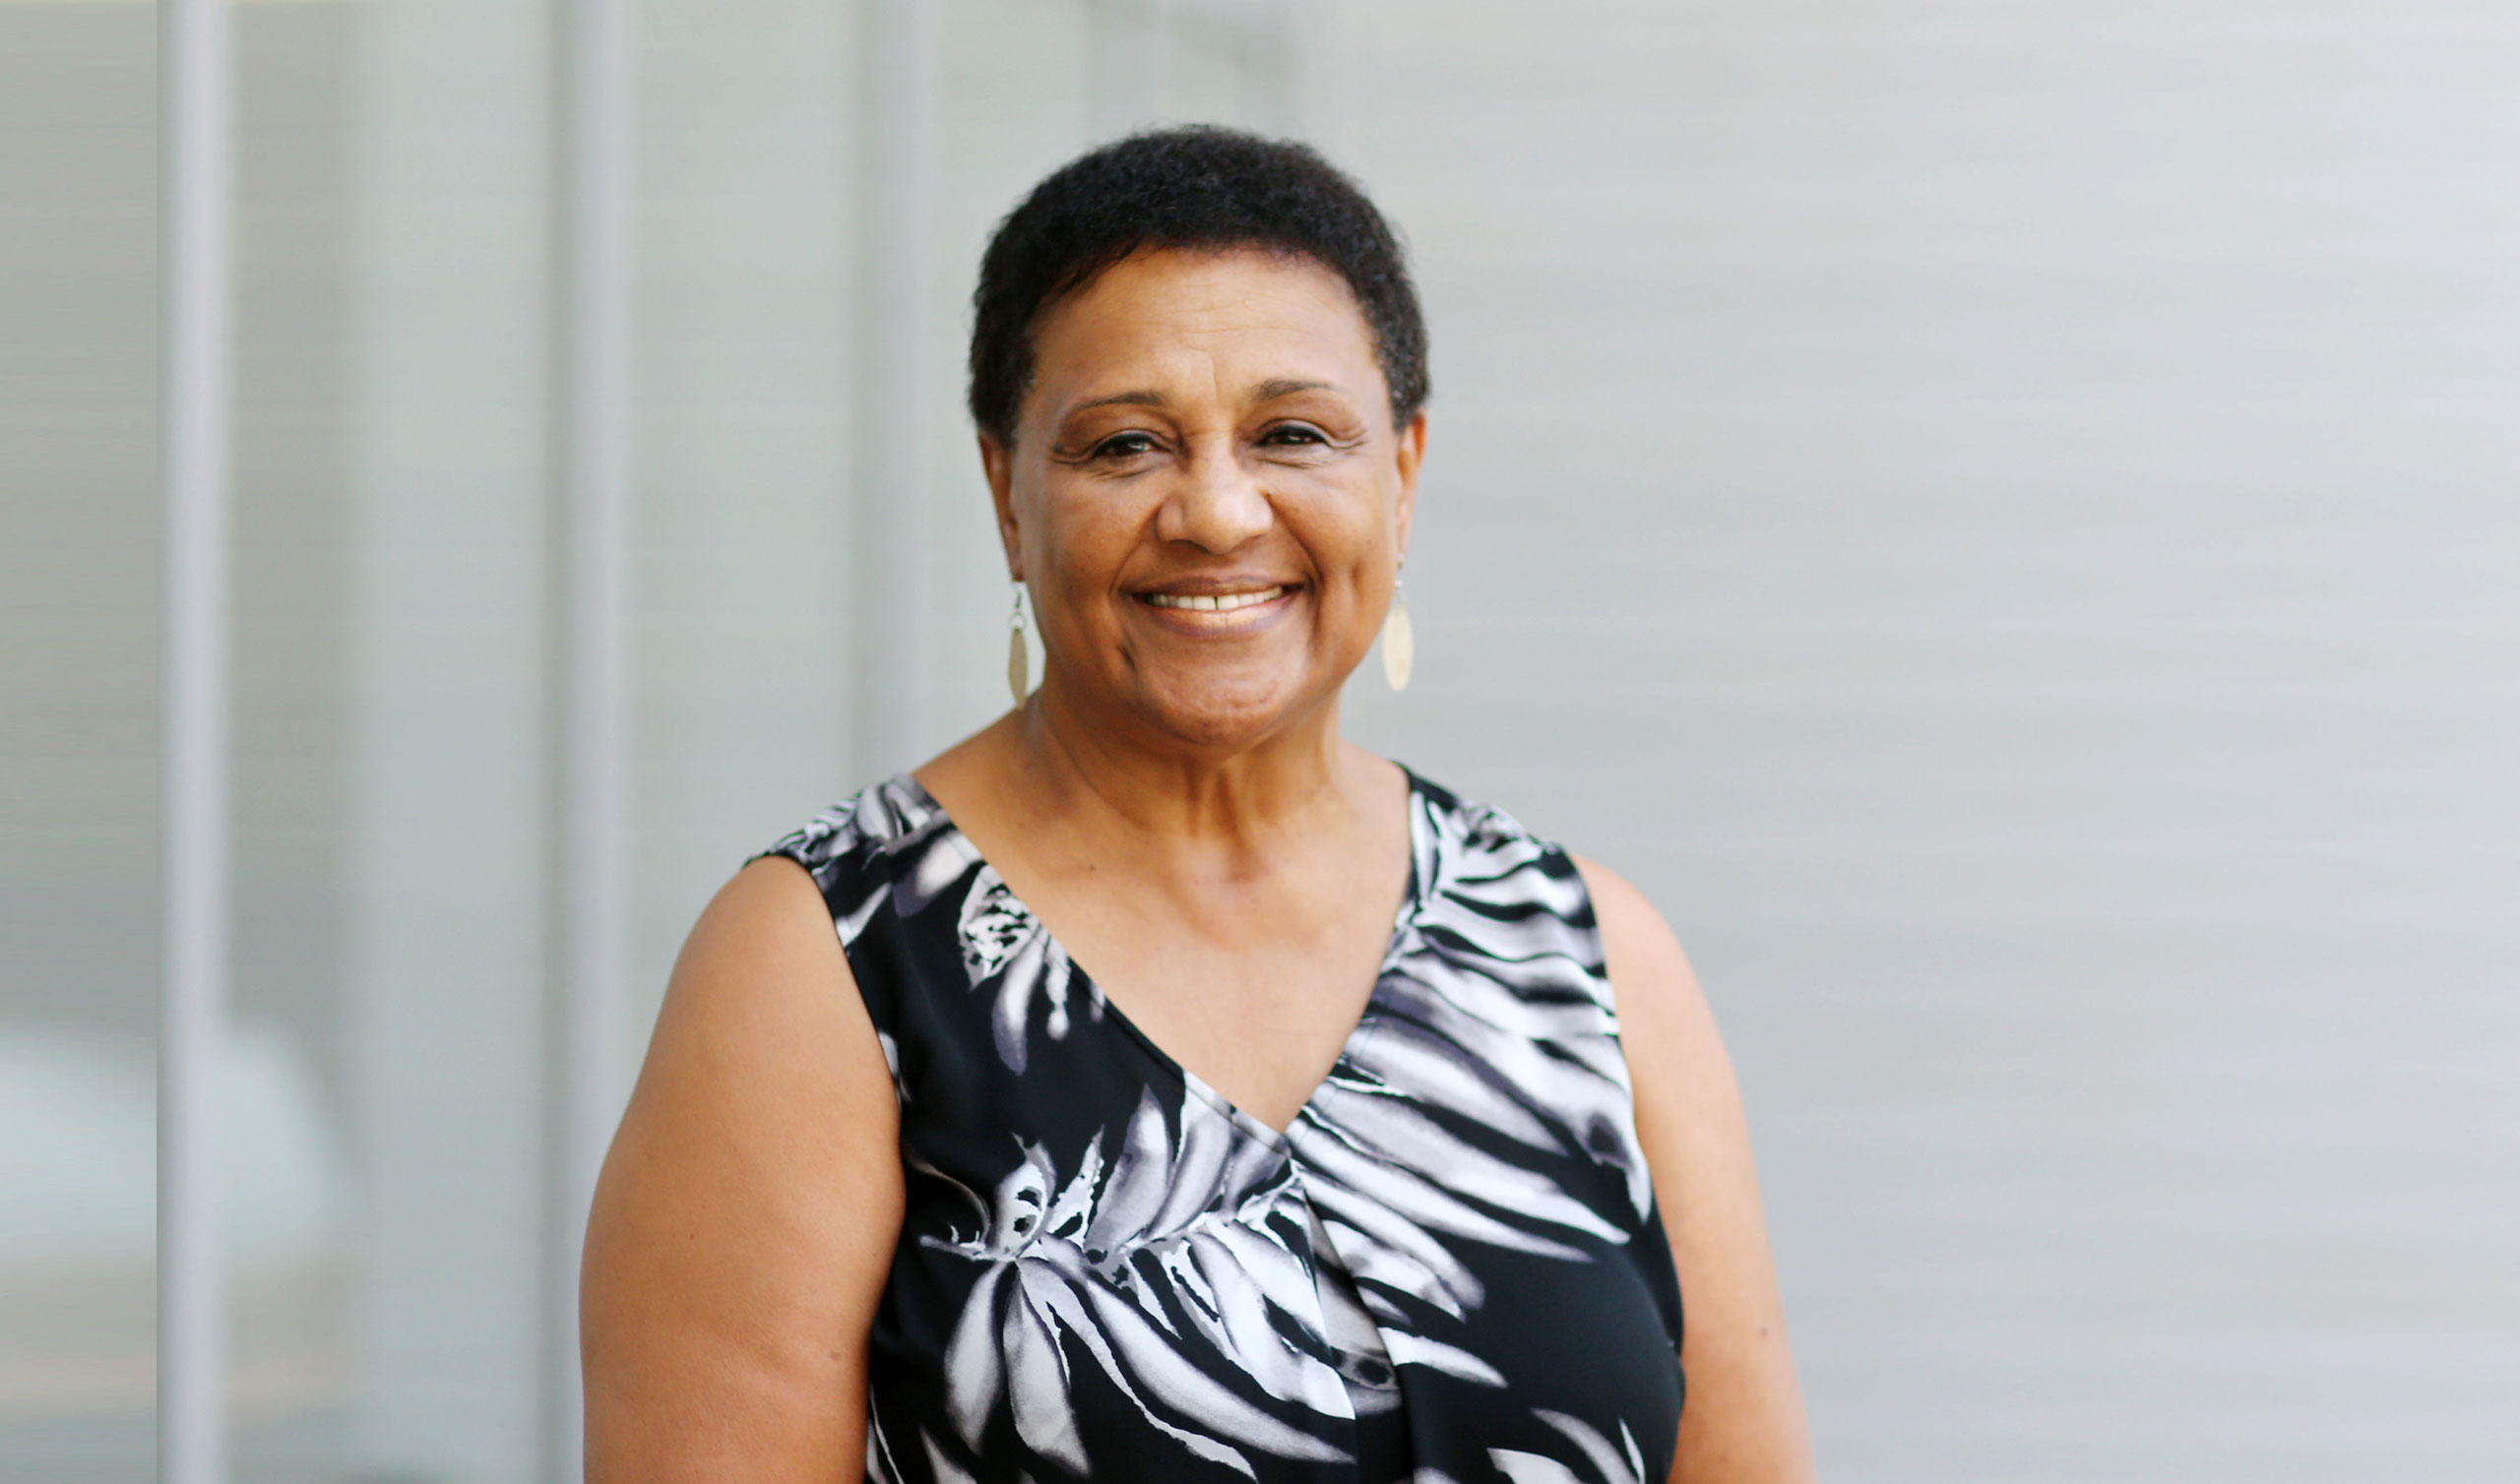 Faculty member and donor, Gail Washington